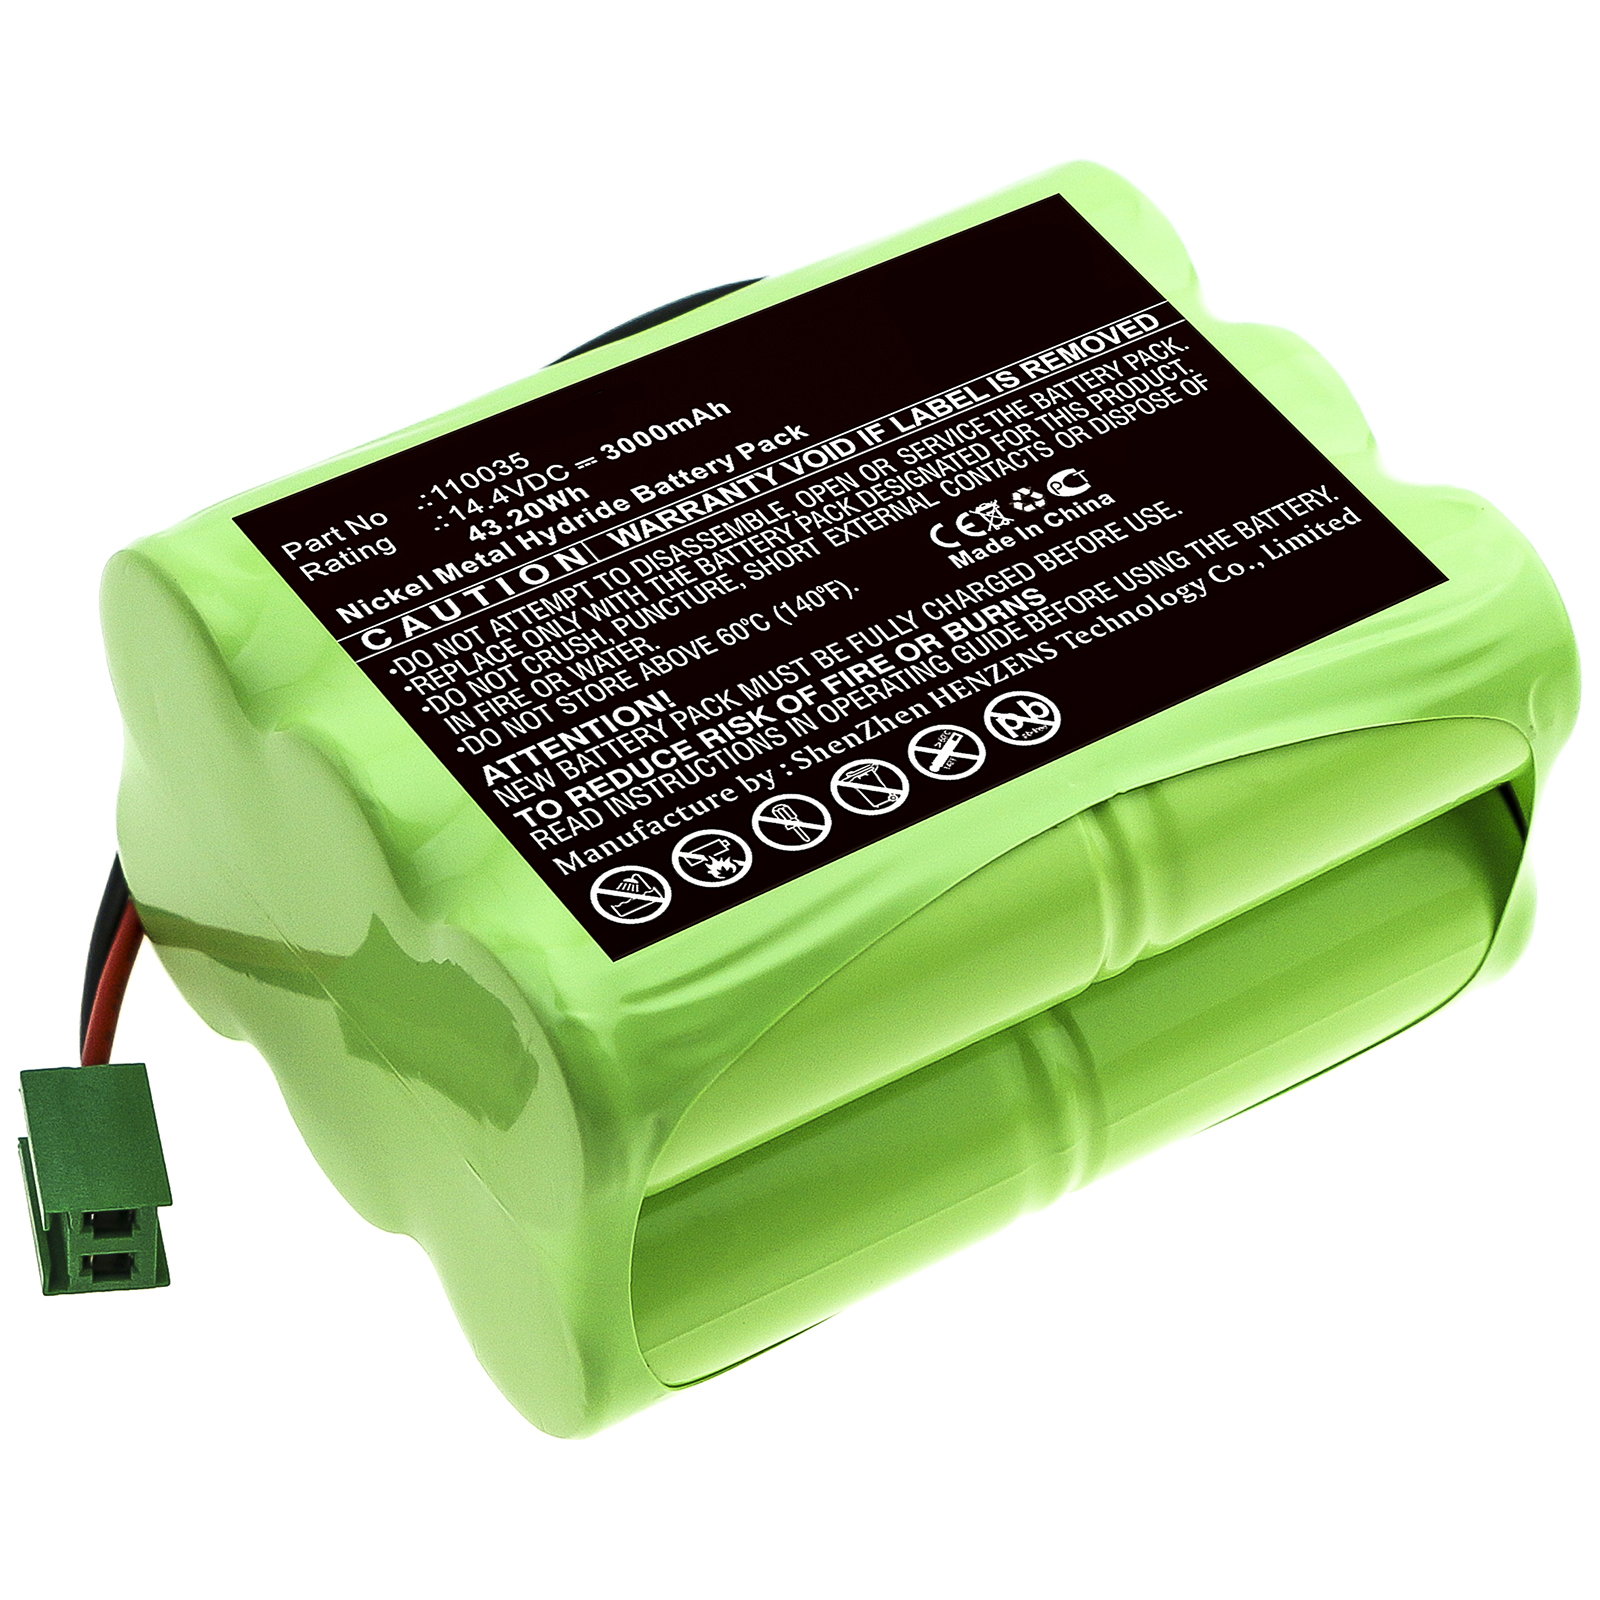 Synergy Digital Medical Battery, Compatible with Hellige 110035 Medical Battery (14.4V, Ni-MH, 3000mAh)